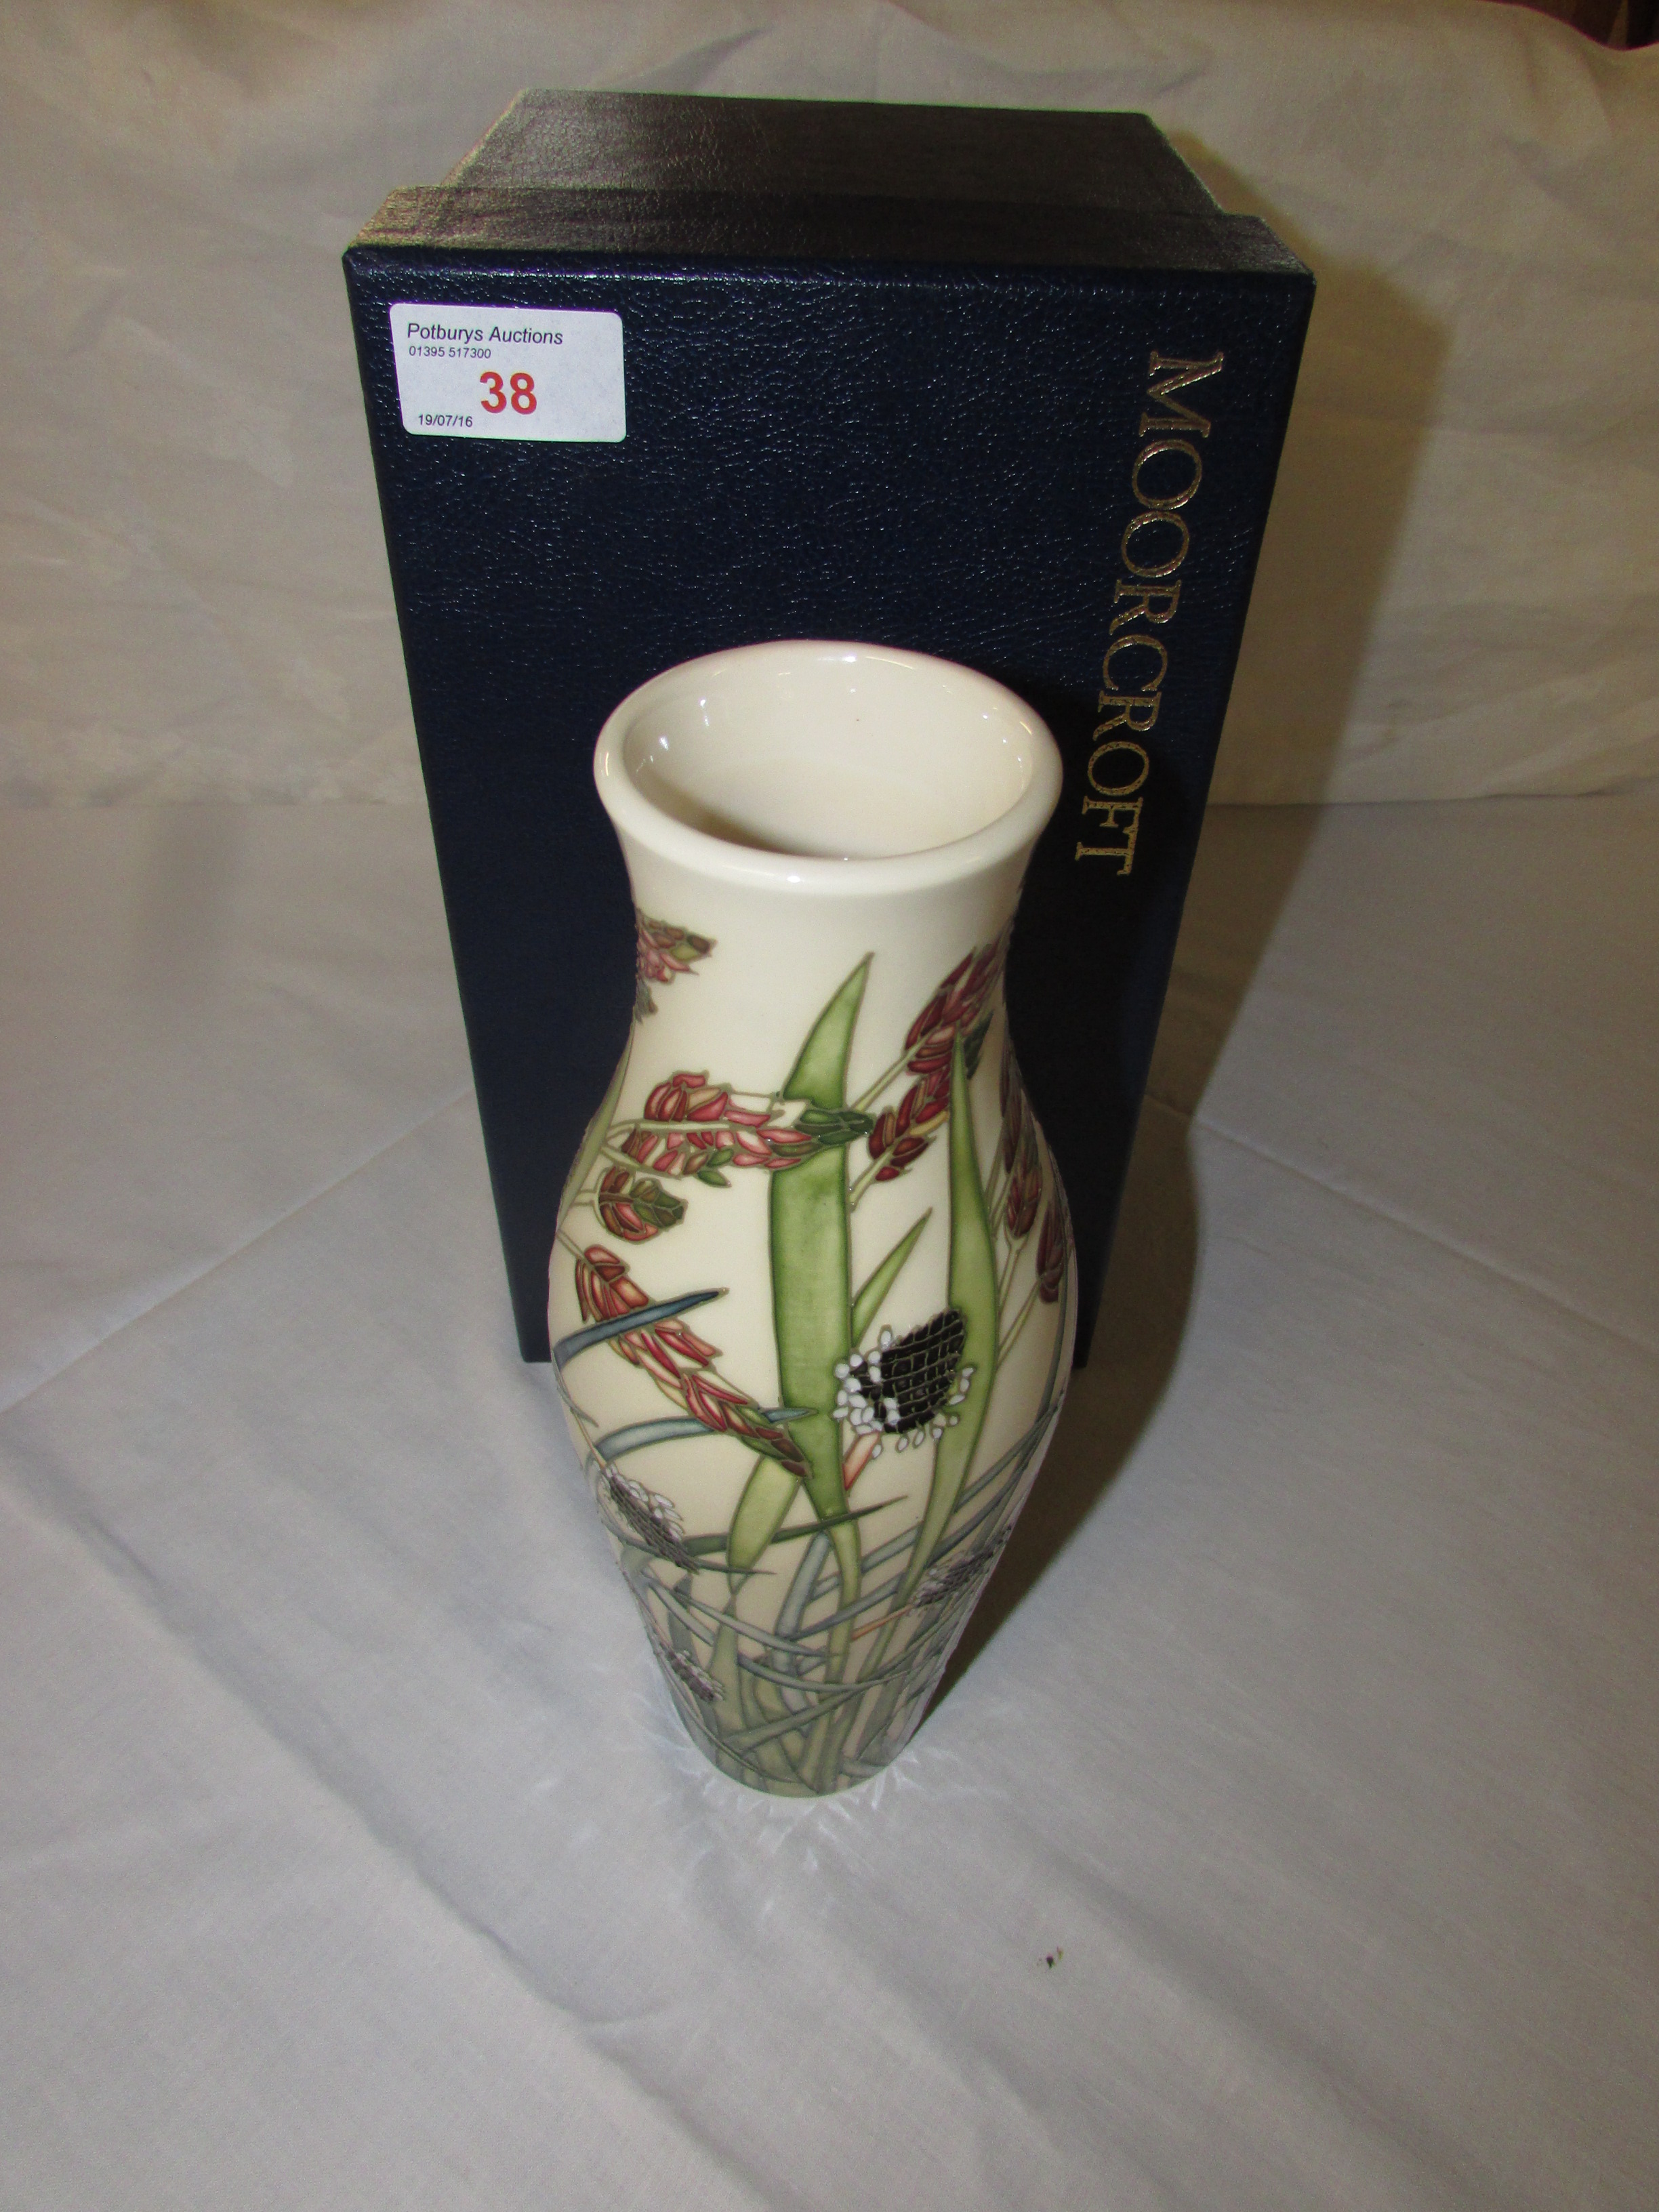 Moorcroft vase 120/9 'Savannah' pattern designed by Emma Bossons 2001, height 25cm, with box